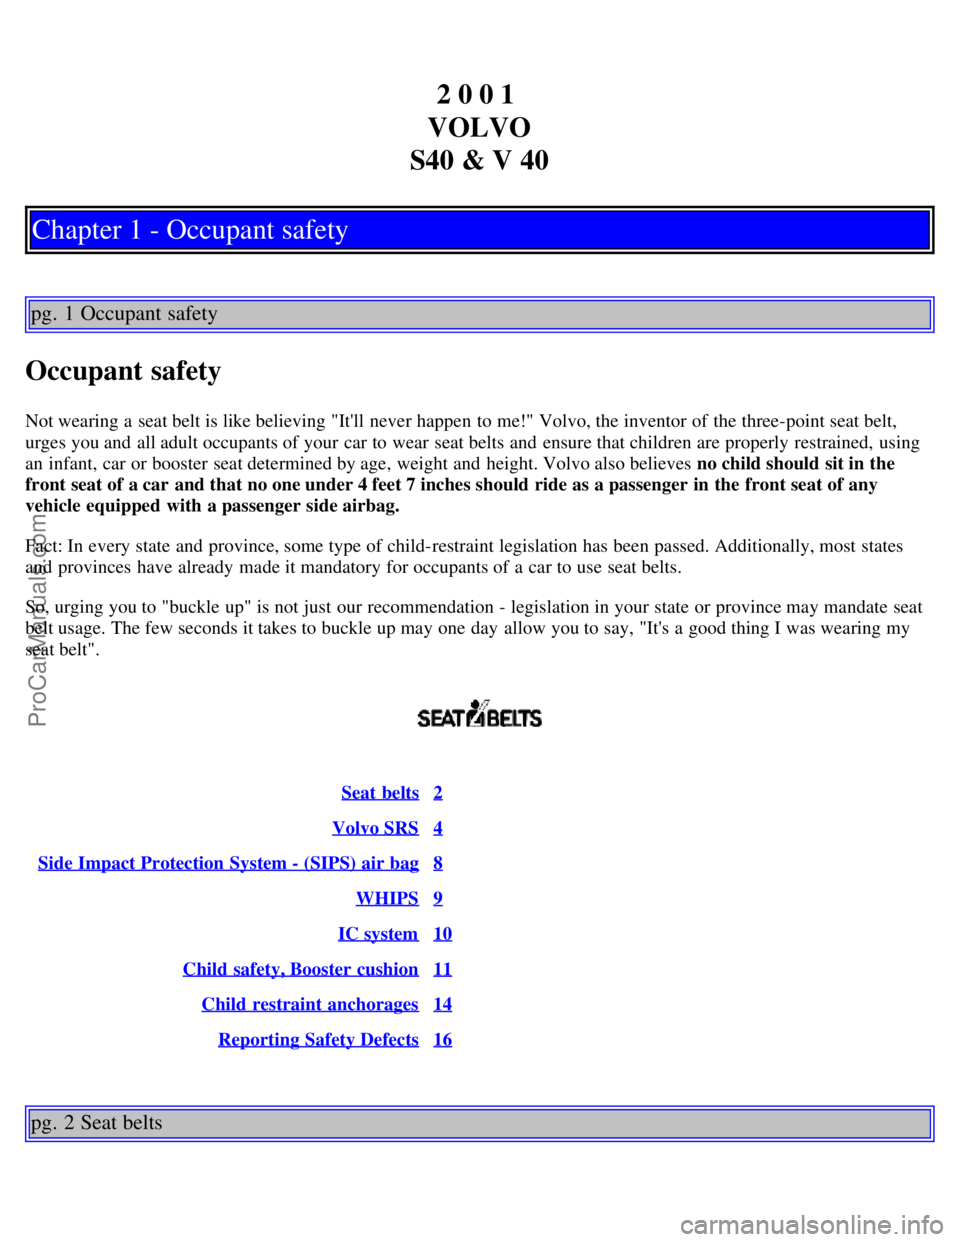 VOLVO S40 2001  Owners Manual 2 0 0 1 
VOLVO
S40 & V 40
Chapter 1 - Occupant safety
pg. 1 Occupant safety
Occupant safety
Not wearing a  seat belt is like believing "Itll  never happen to me!" Volvo, the inventor of the three-poi